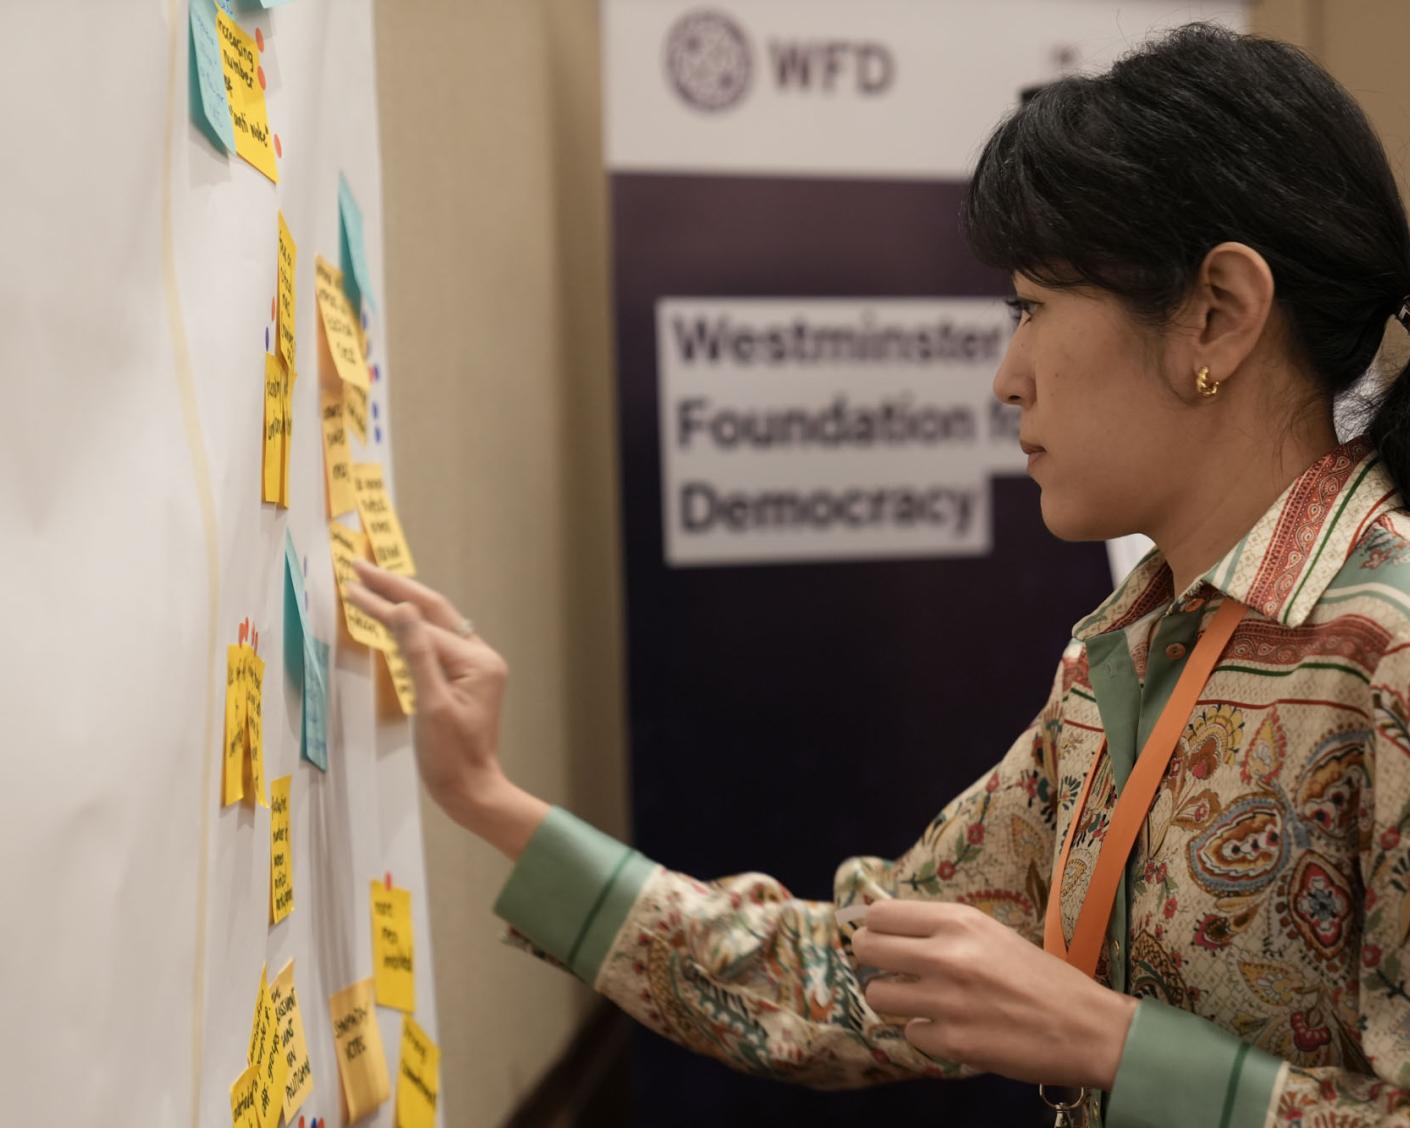 A woman adds her contribution on a sticky note to a wall of other notes. She stands in front of a sign on which the words Westminster Foundation for Democracy can be read